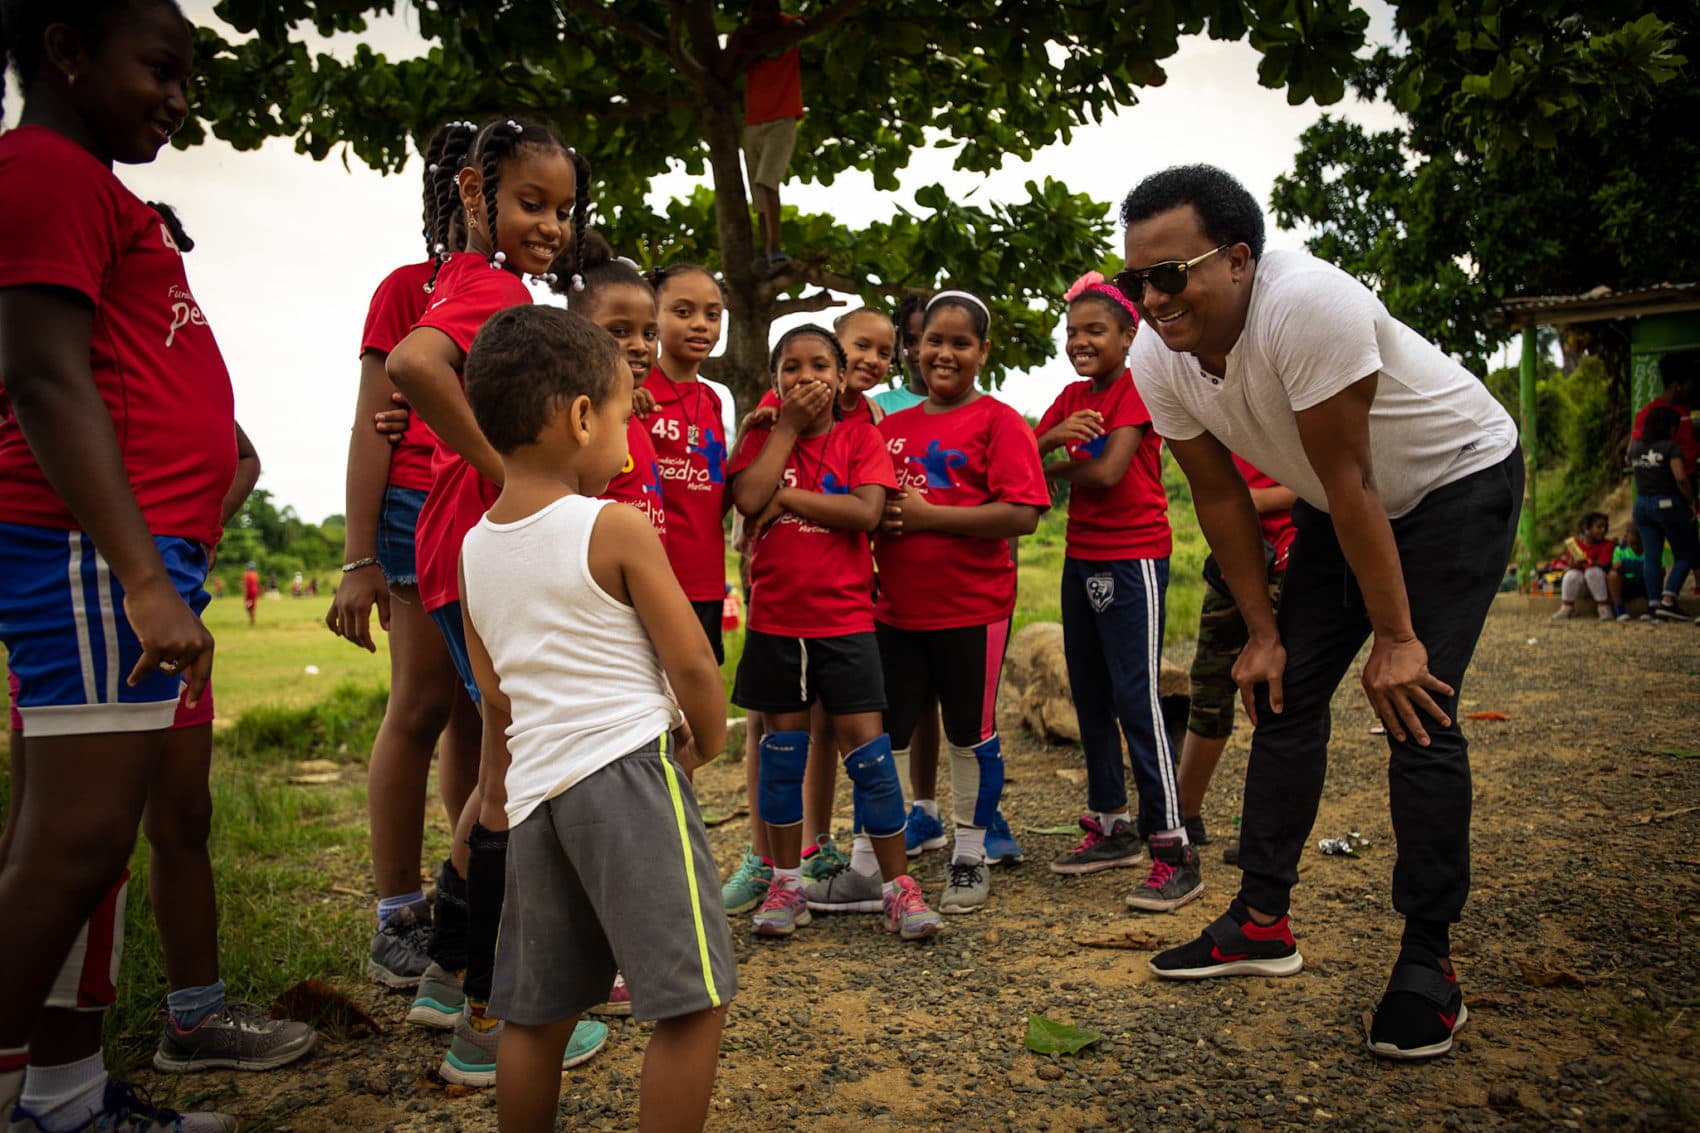 Carolina Martinez And Husband, Former Sox Ace Pedro Martinez, Help Kids At  Bat And In Class In The Dominican Republic